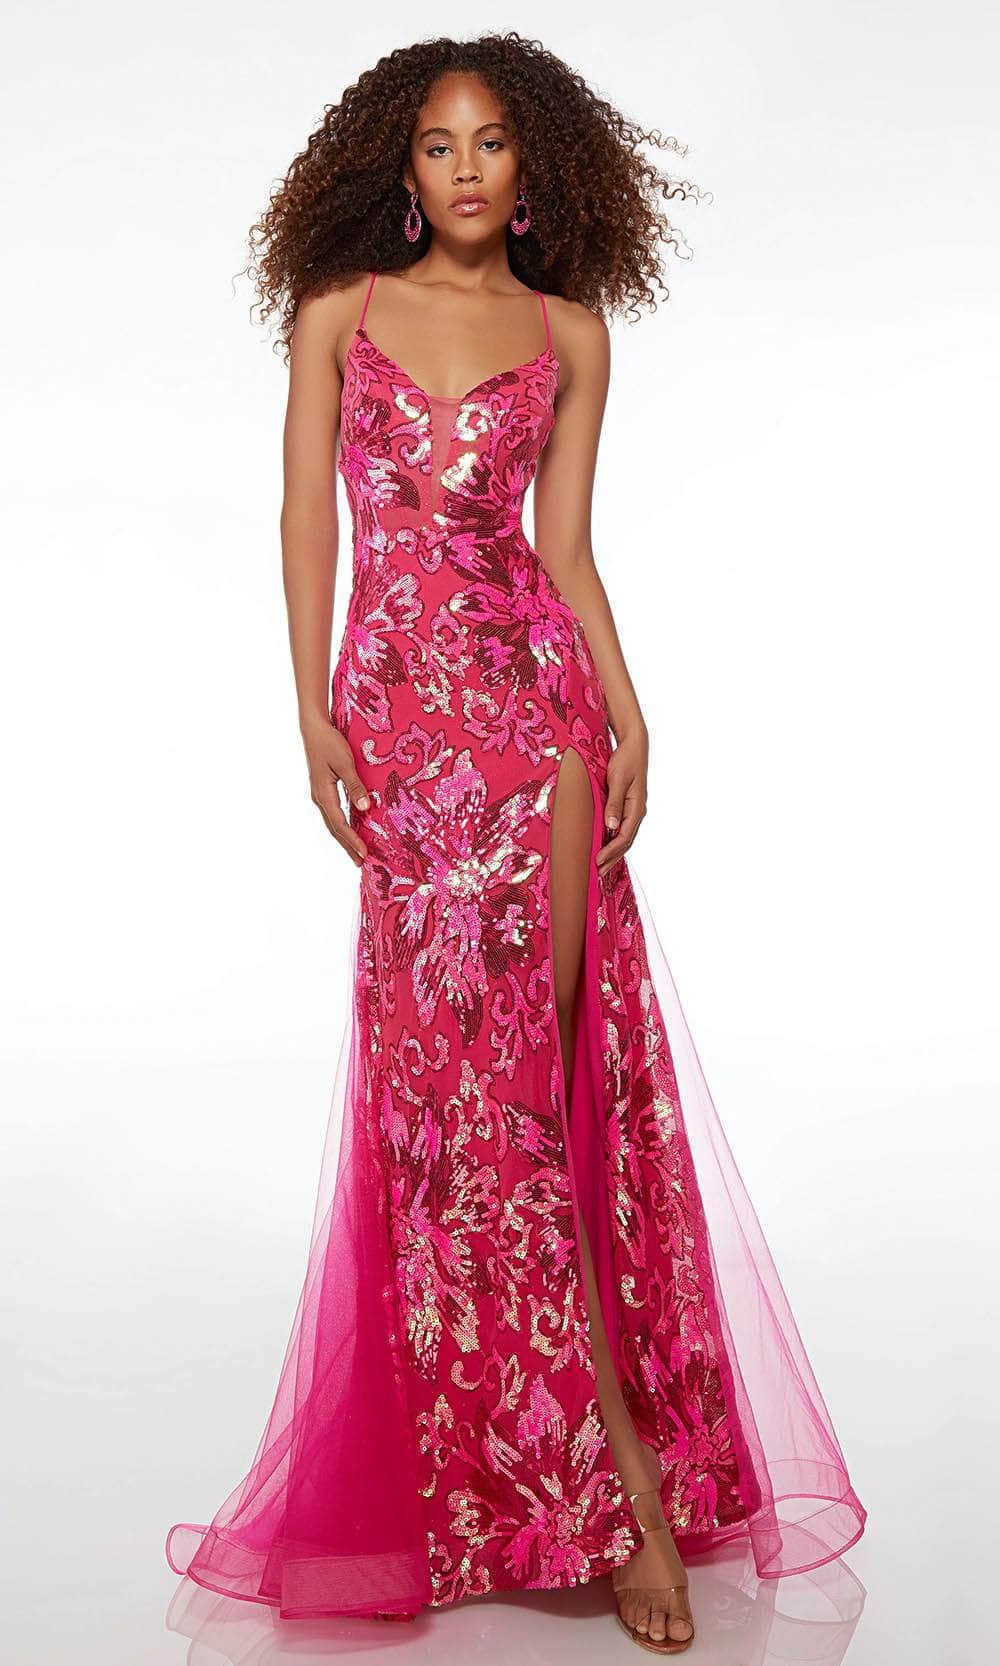 Alyce Paris 61617 - Plunging V-Neck Floral Prom Gown Special Occasion Dress 000 / Fuchsia